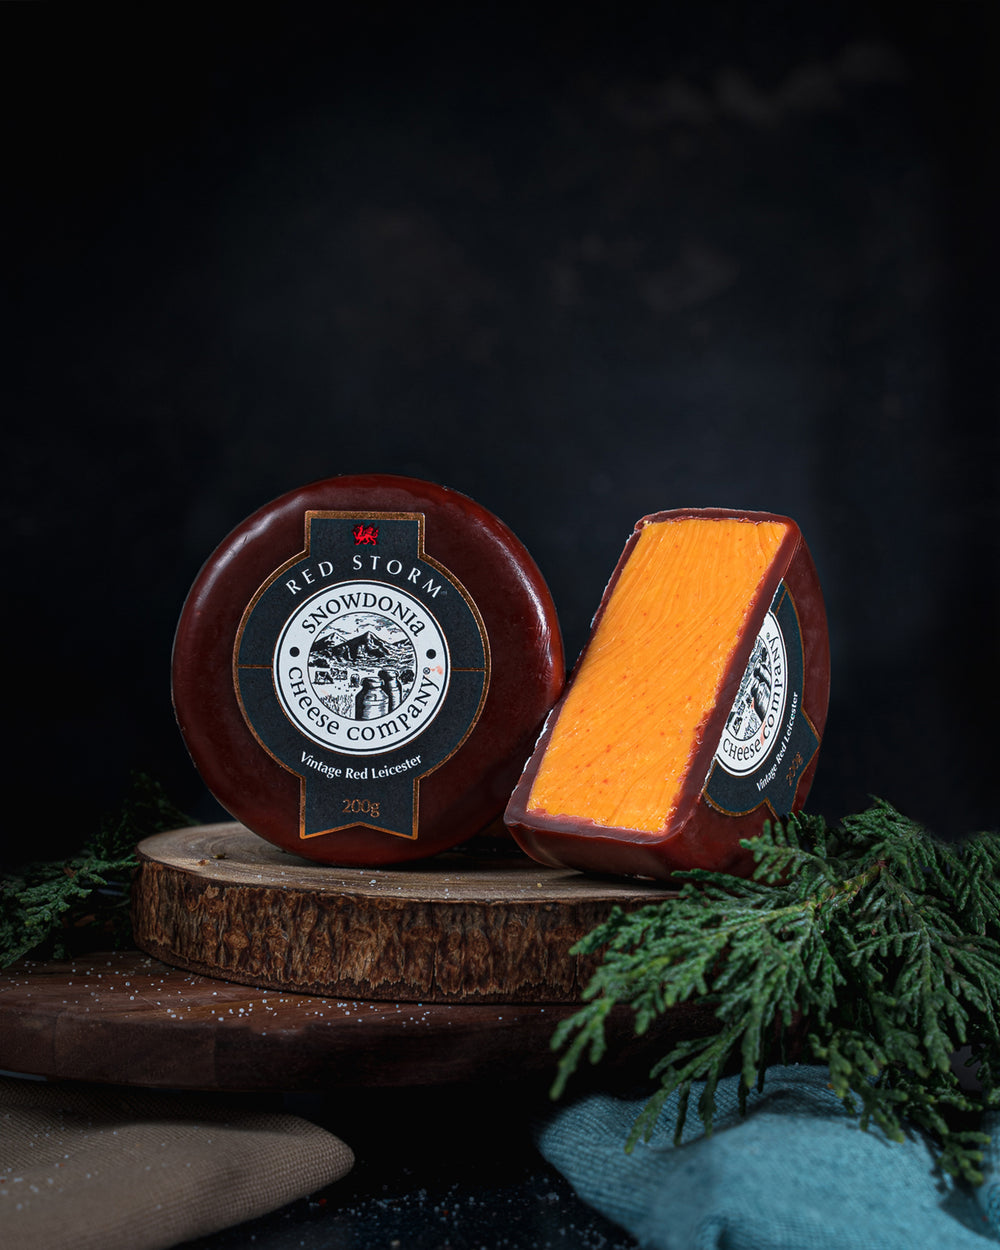 Red Storm Vintage Red Leicester